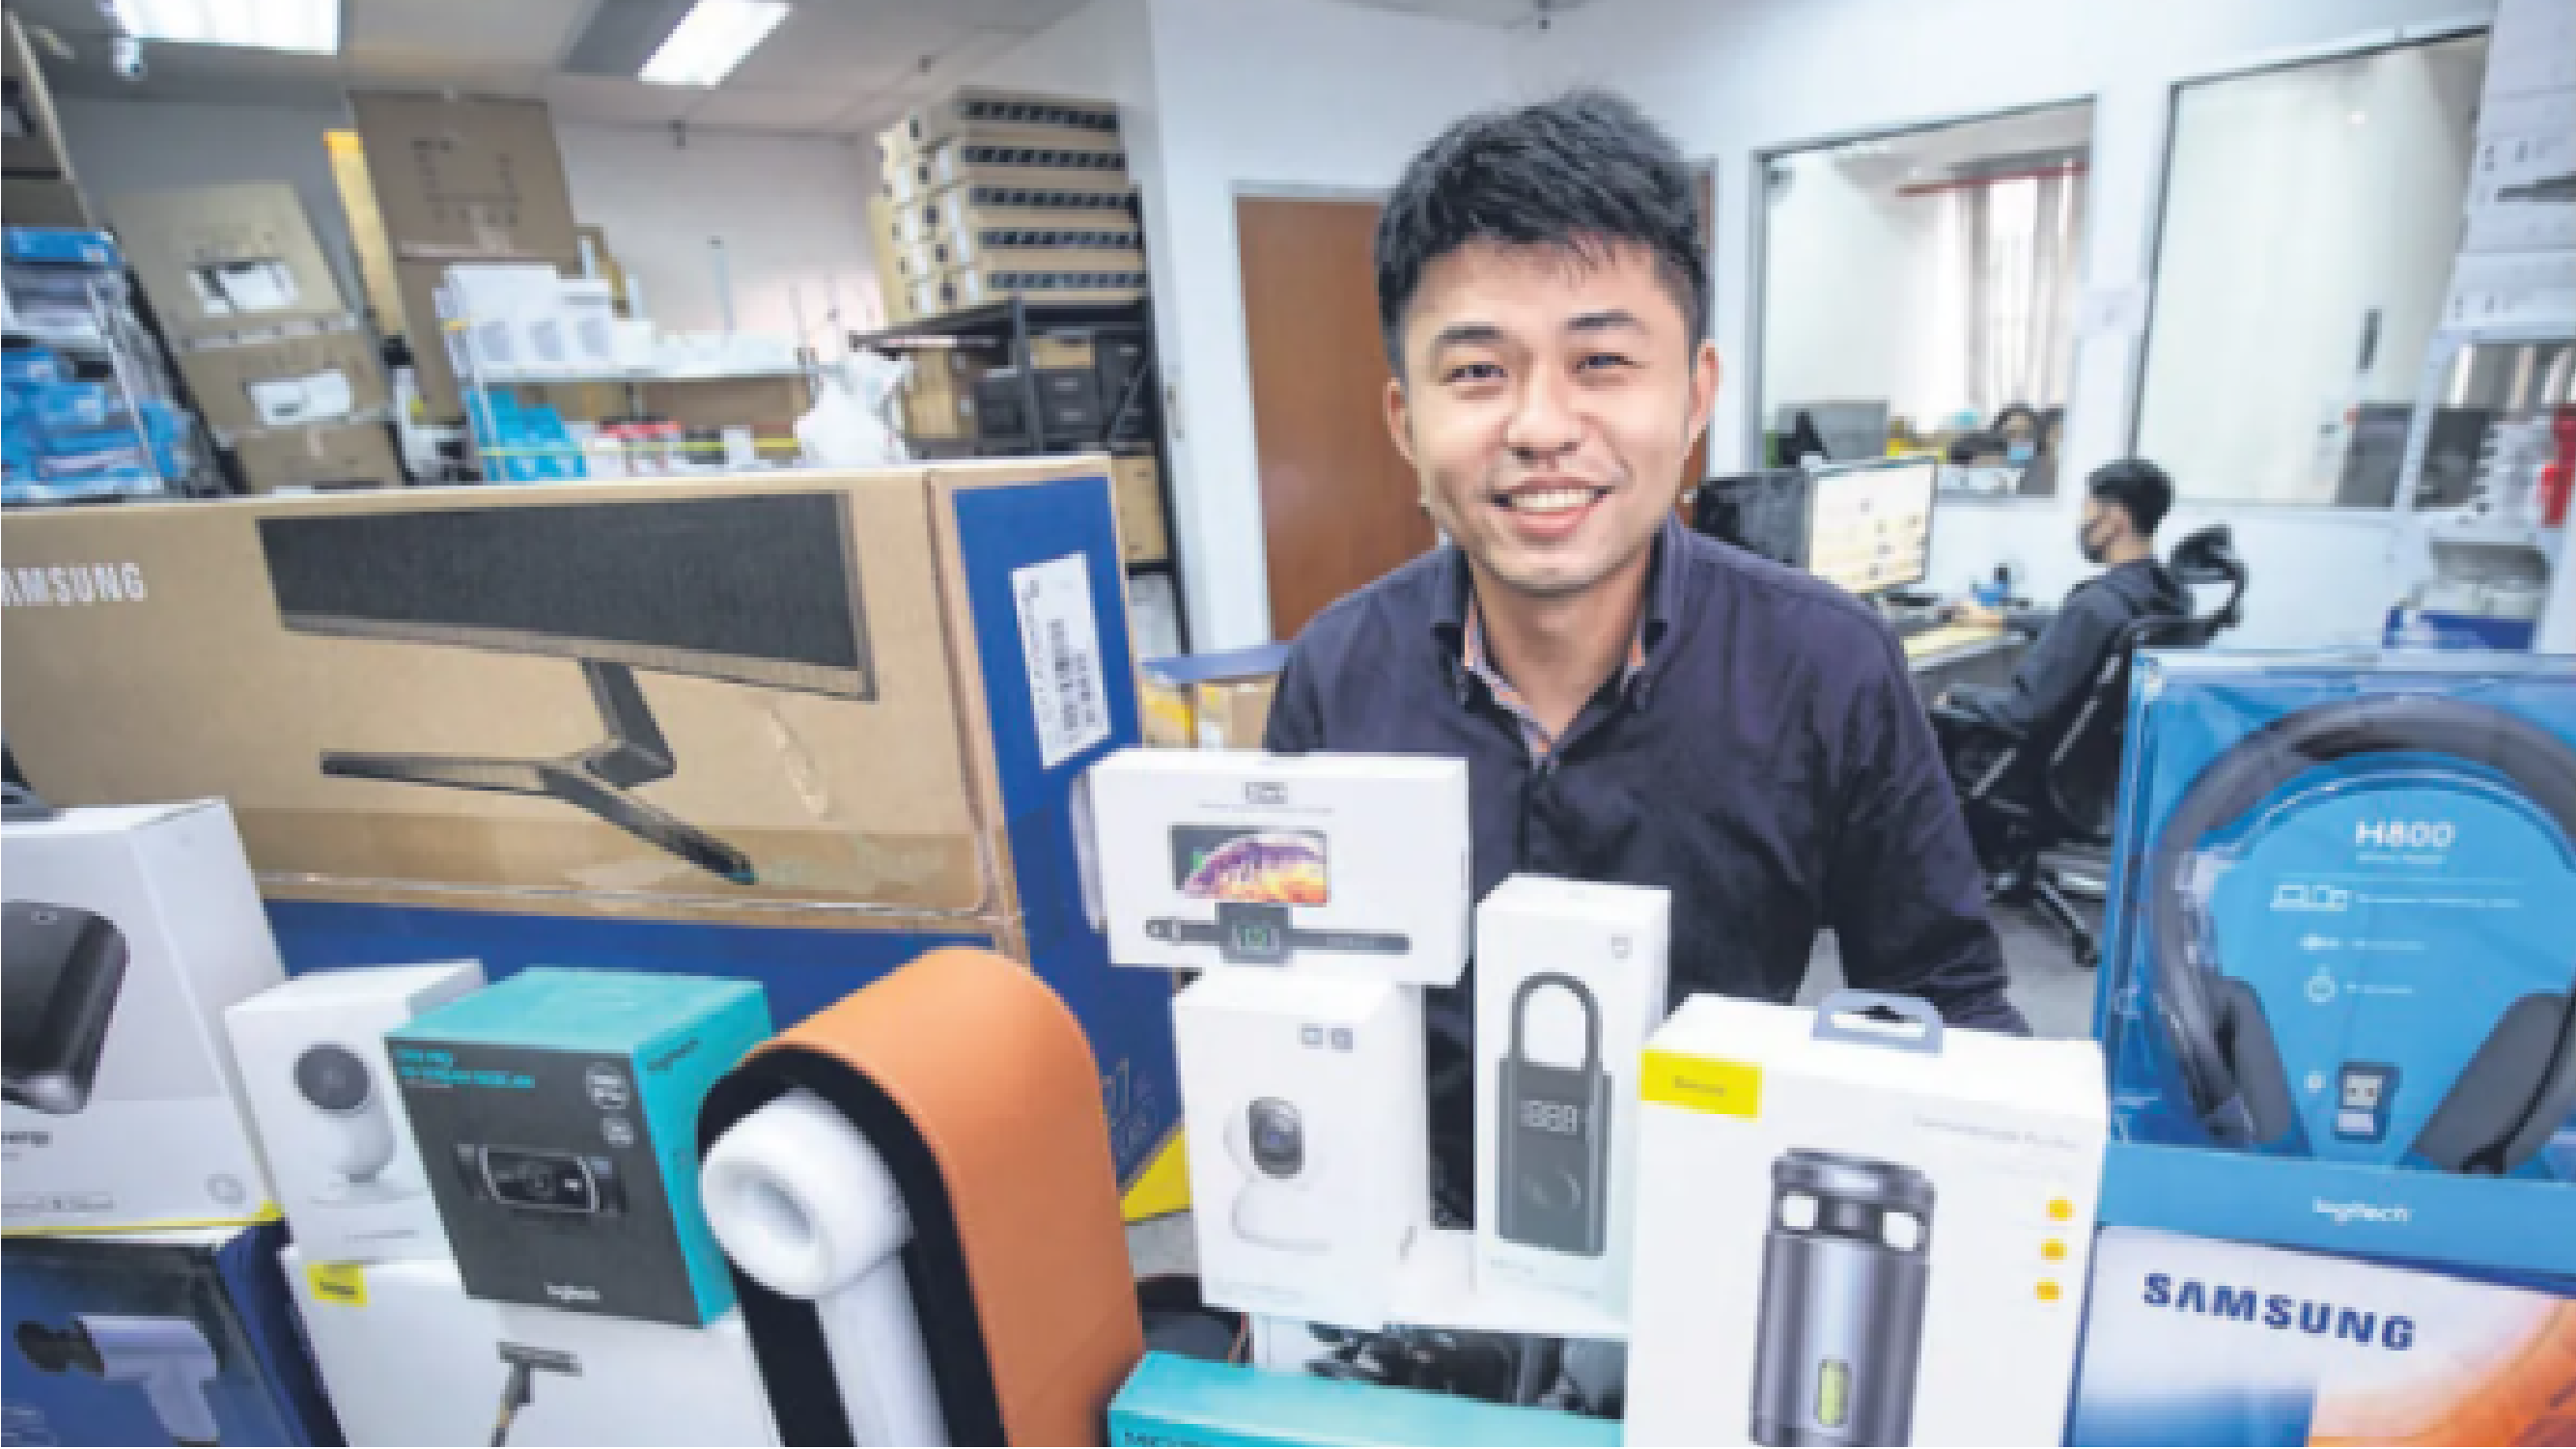 A man smiling, surrounded by electronics at his desk, highlighting Kearea's use case for data-driven business through the BDDB programme